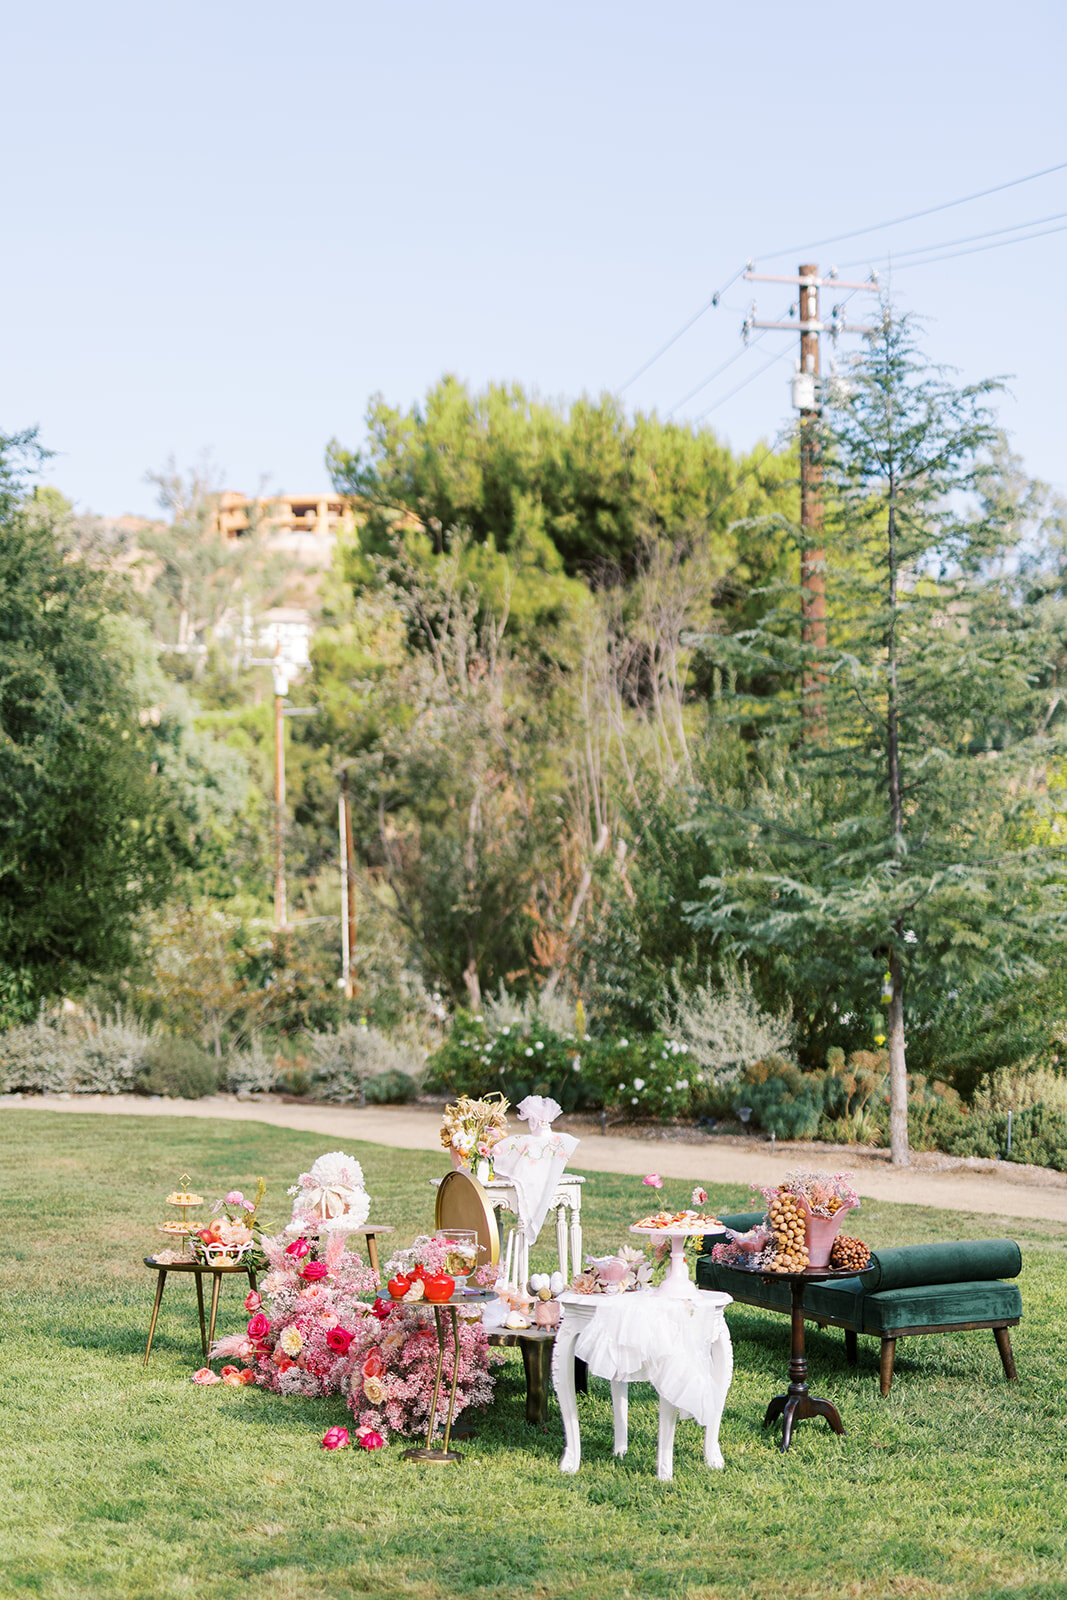 Angelica Marie Photography_Natalie Pirzad and Gordon Stewart Wedding_September 2022_The Lodge at Malibou Lake Wedding_Malibu Wedding Photographer_910